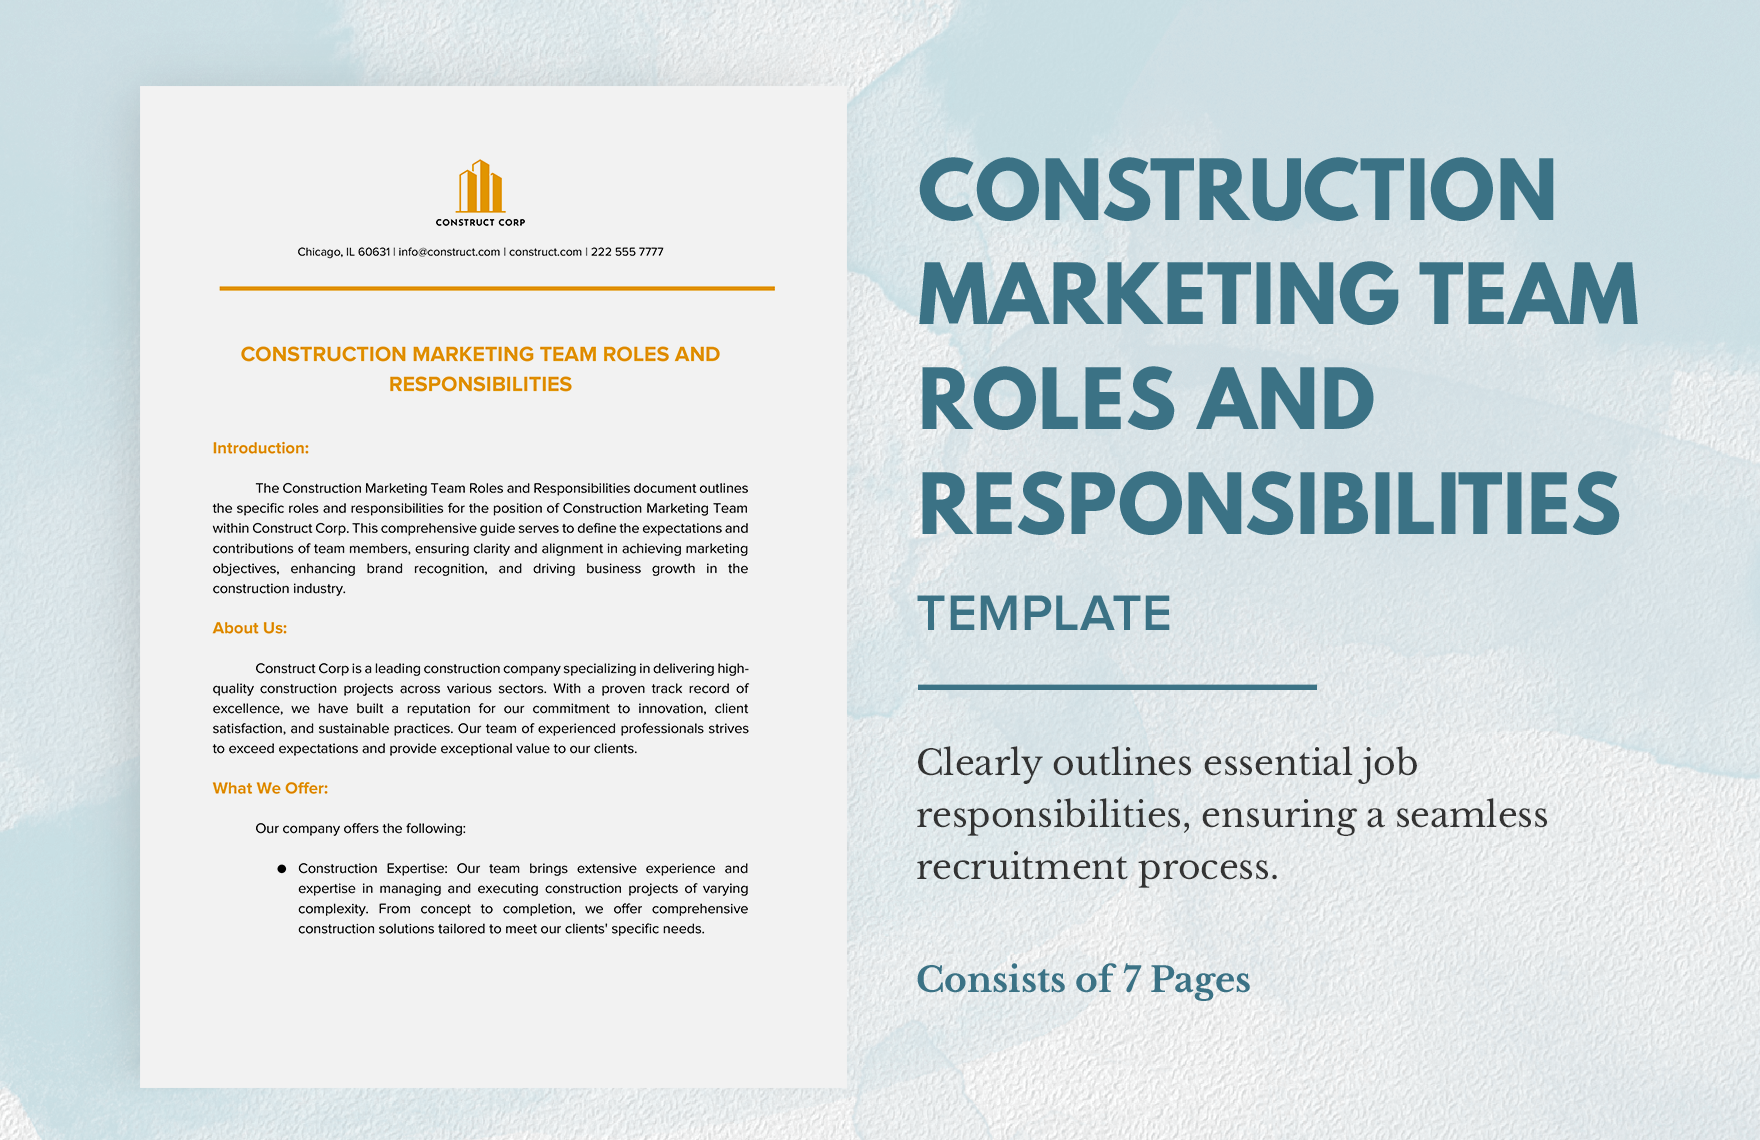 Construction Marketing Team Roles and Responsibilities Template